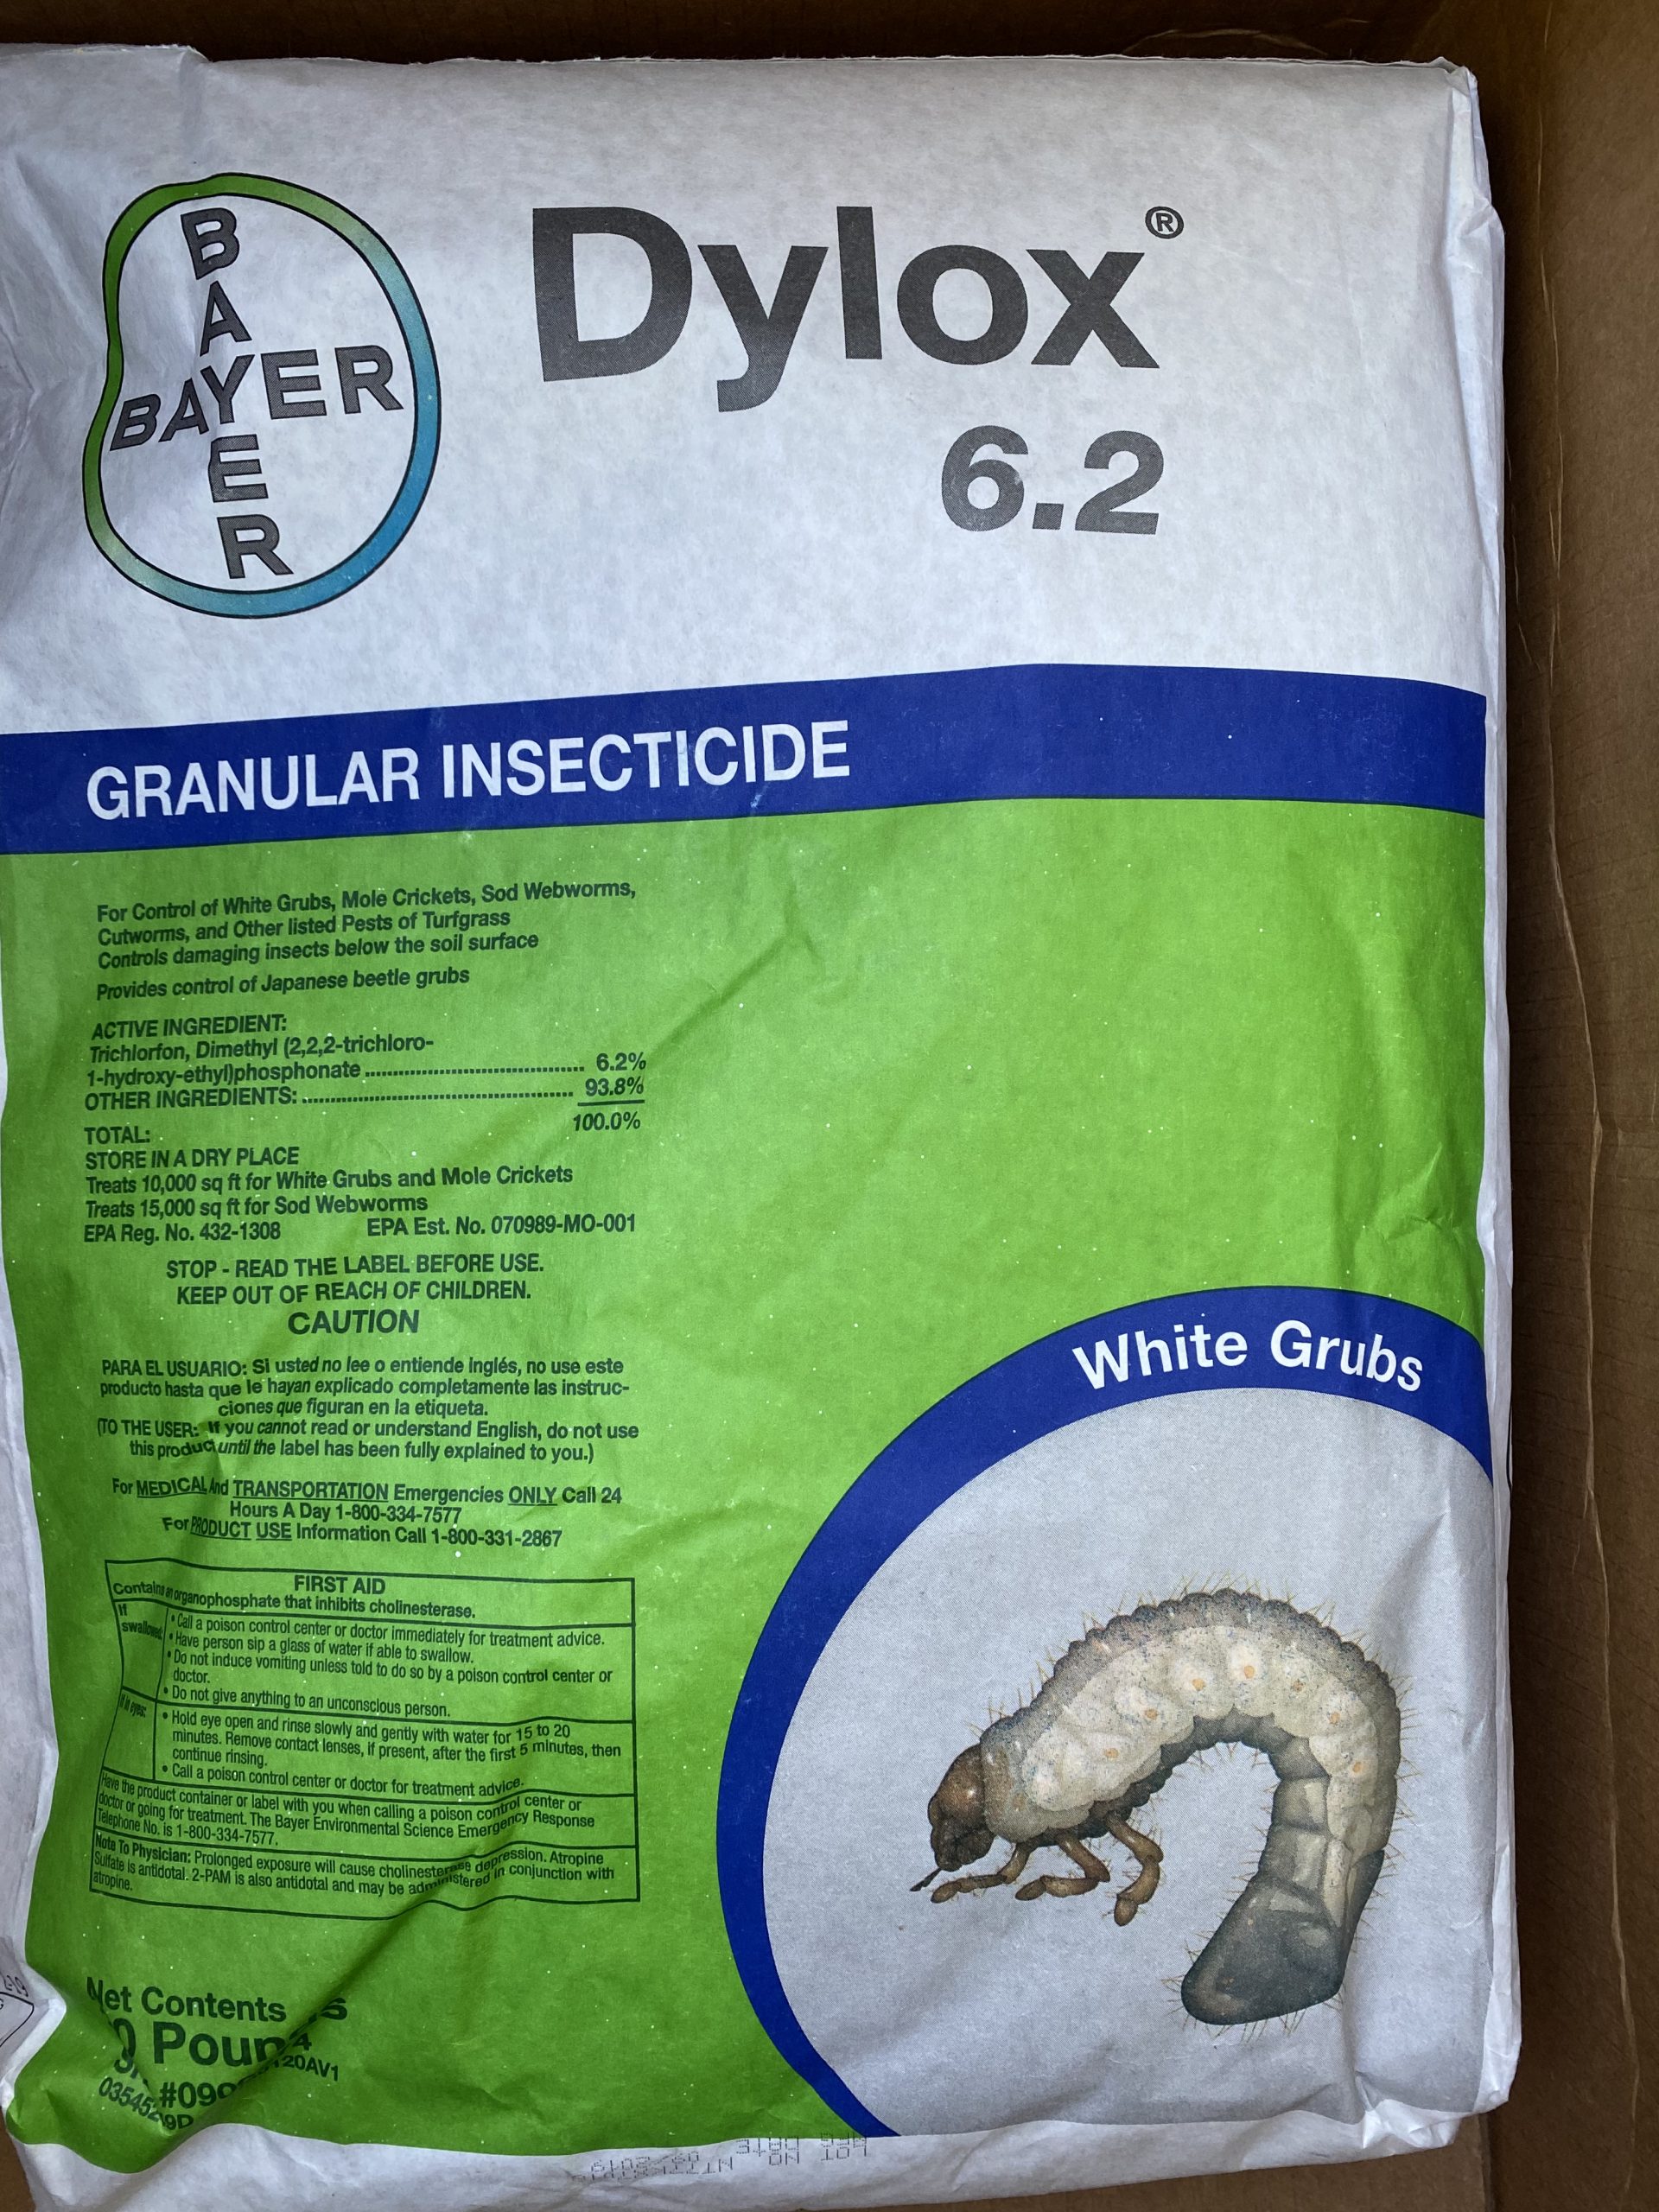 Dylox 6.2 G granular insecticide - front of bag